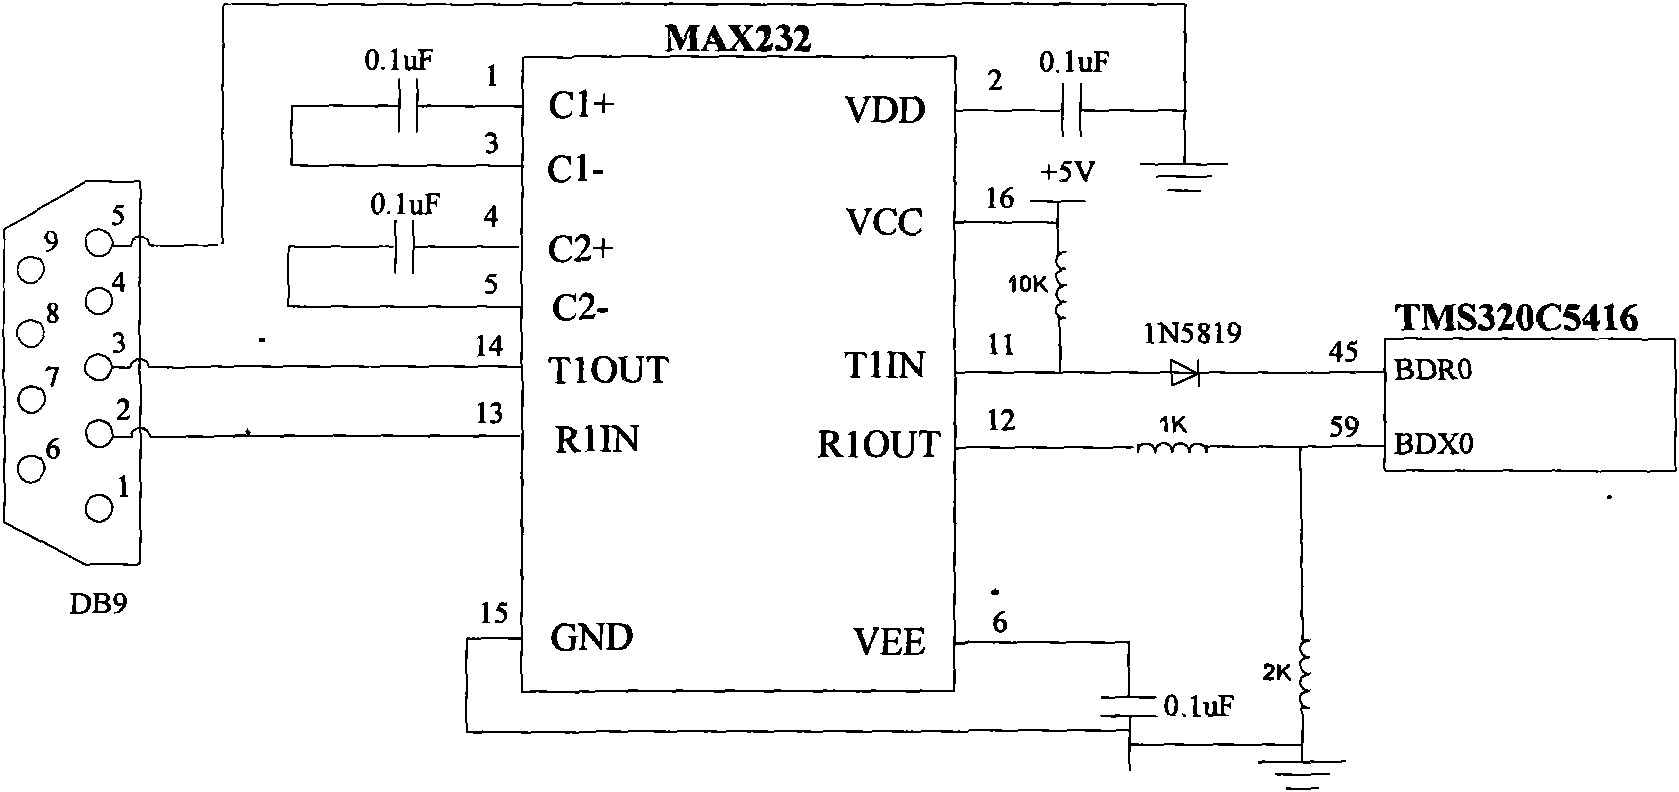 Self-adaptive device and method for analyzing global power flow of generation, transmission and distribution